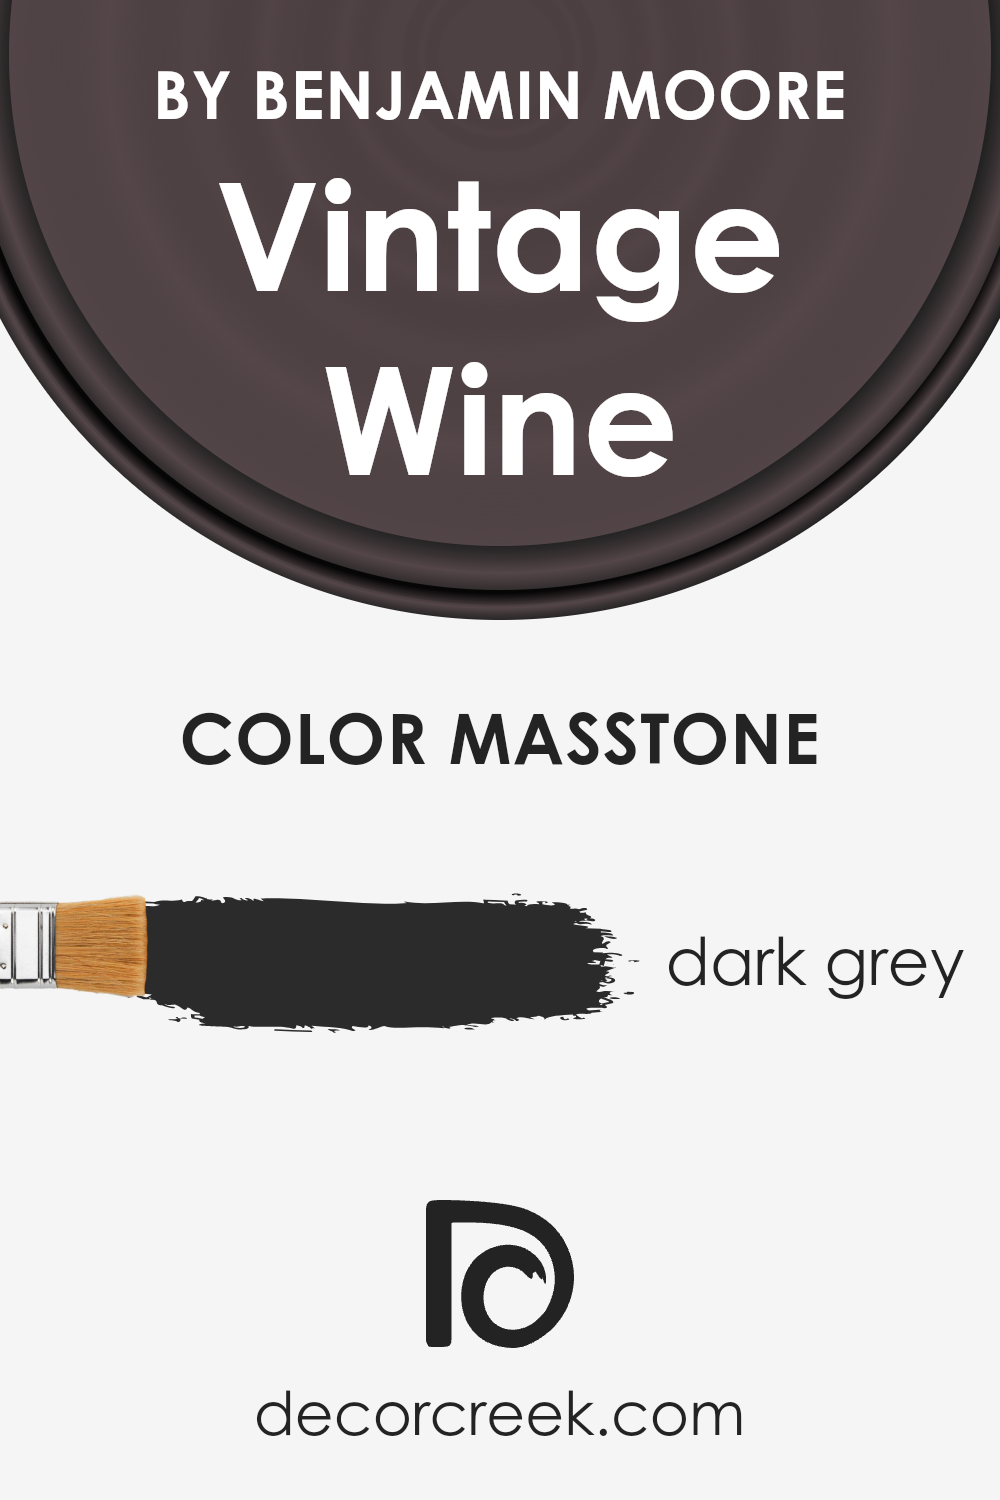 what_is_the_masstone_of_vintage_wine_2116_20